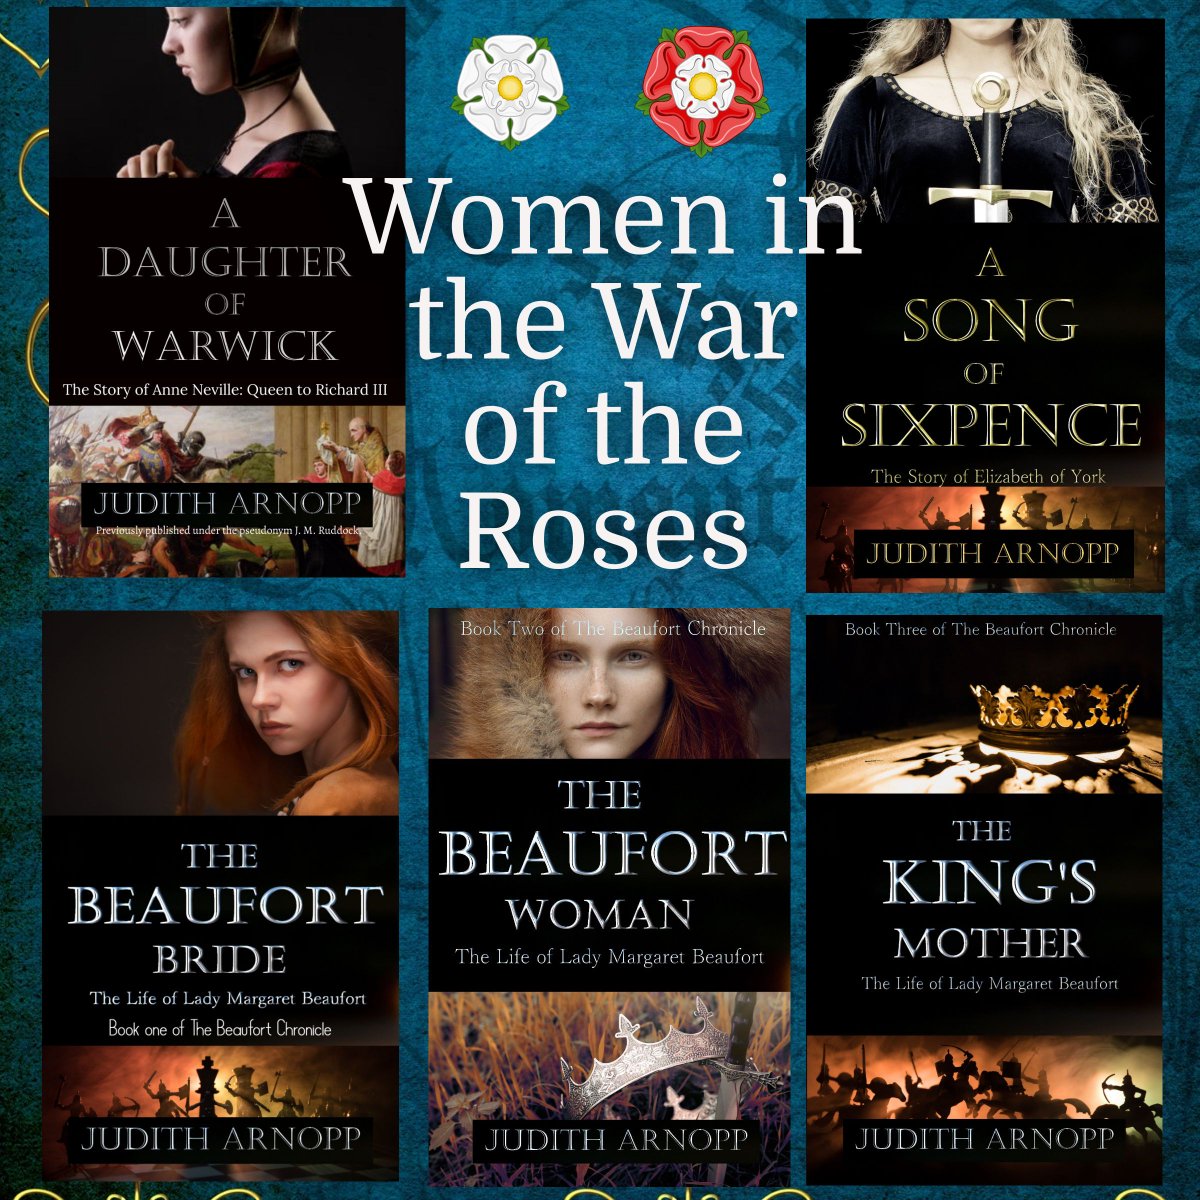 Women of the war of the roses: Margaret Beaufort, Anne Neville, Elizabeth of York author.to/juditharnoppbo… #HistoricalFiction #WomensHistoryMonth #wotr #medieval